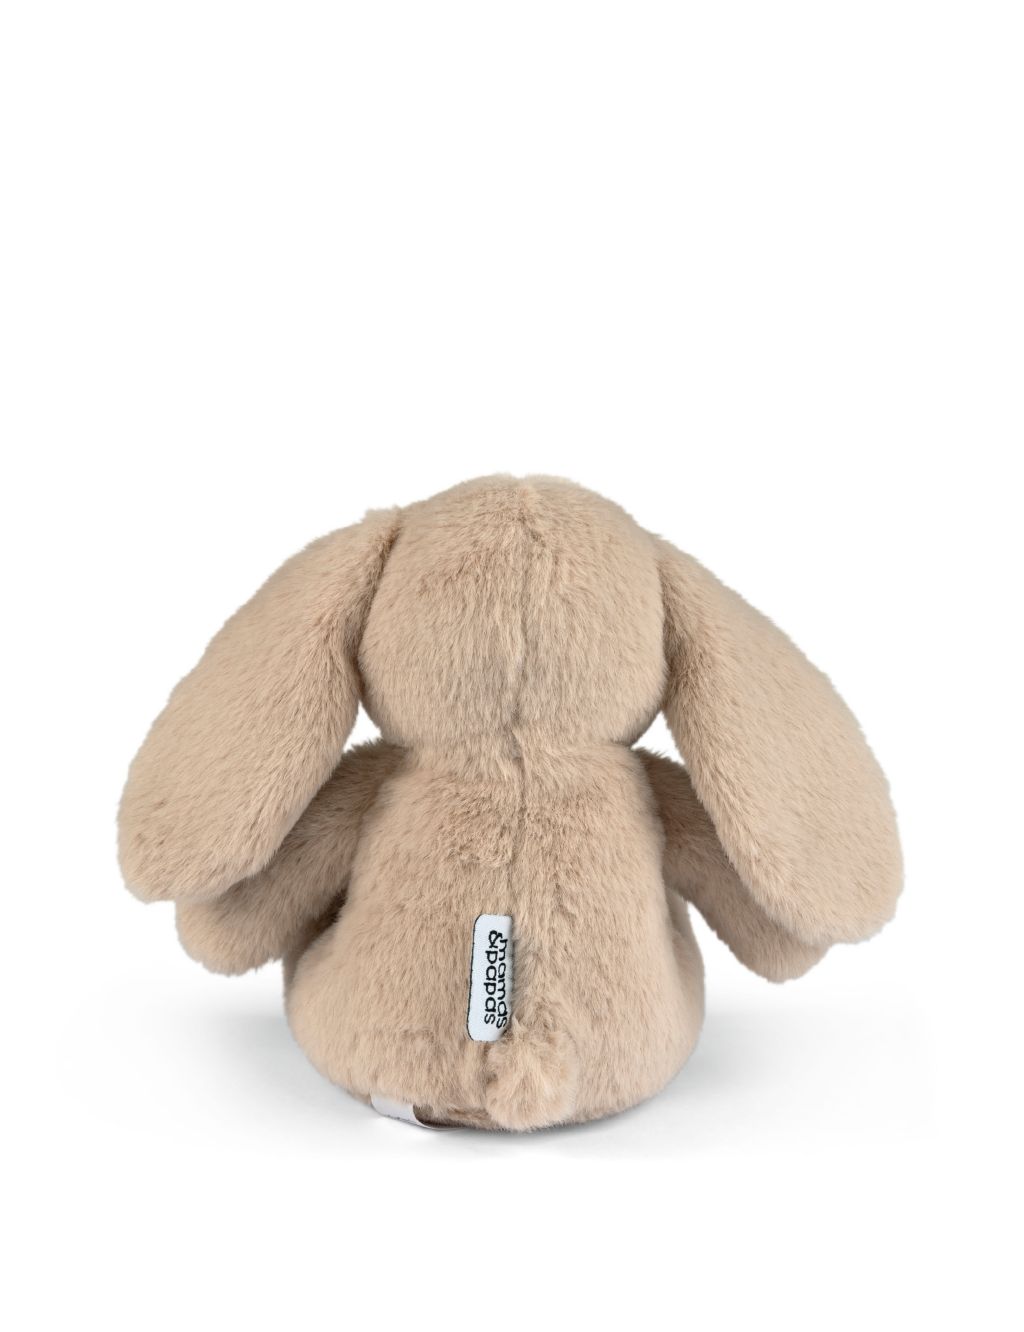 Welcome To The World Small Bunny Soft Toy image 2